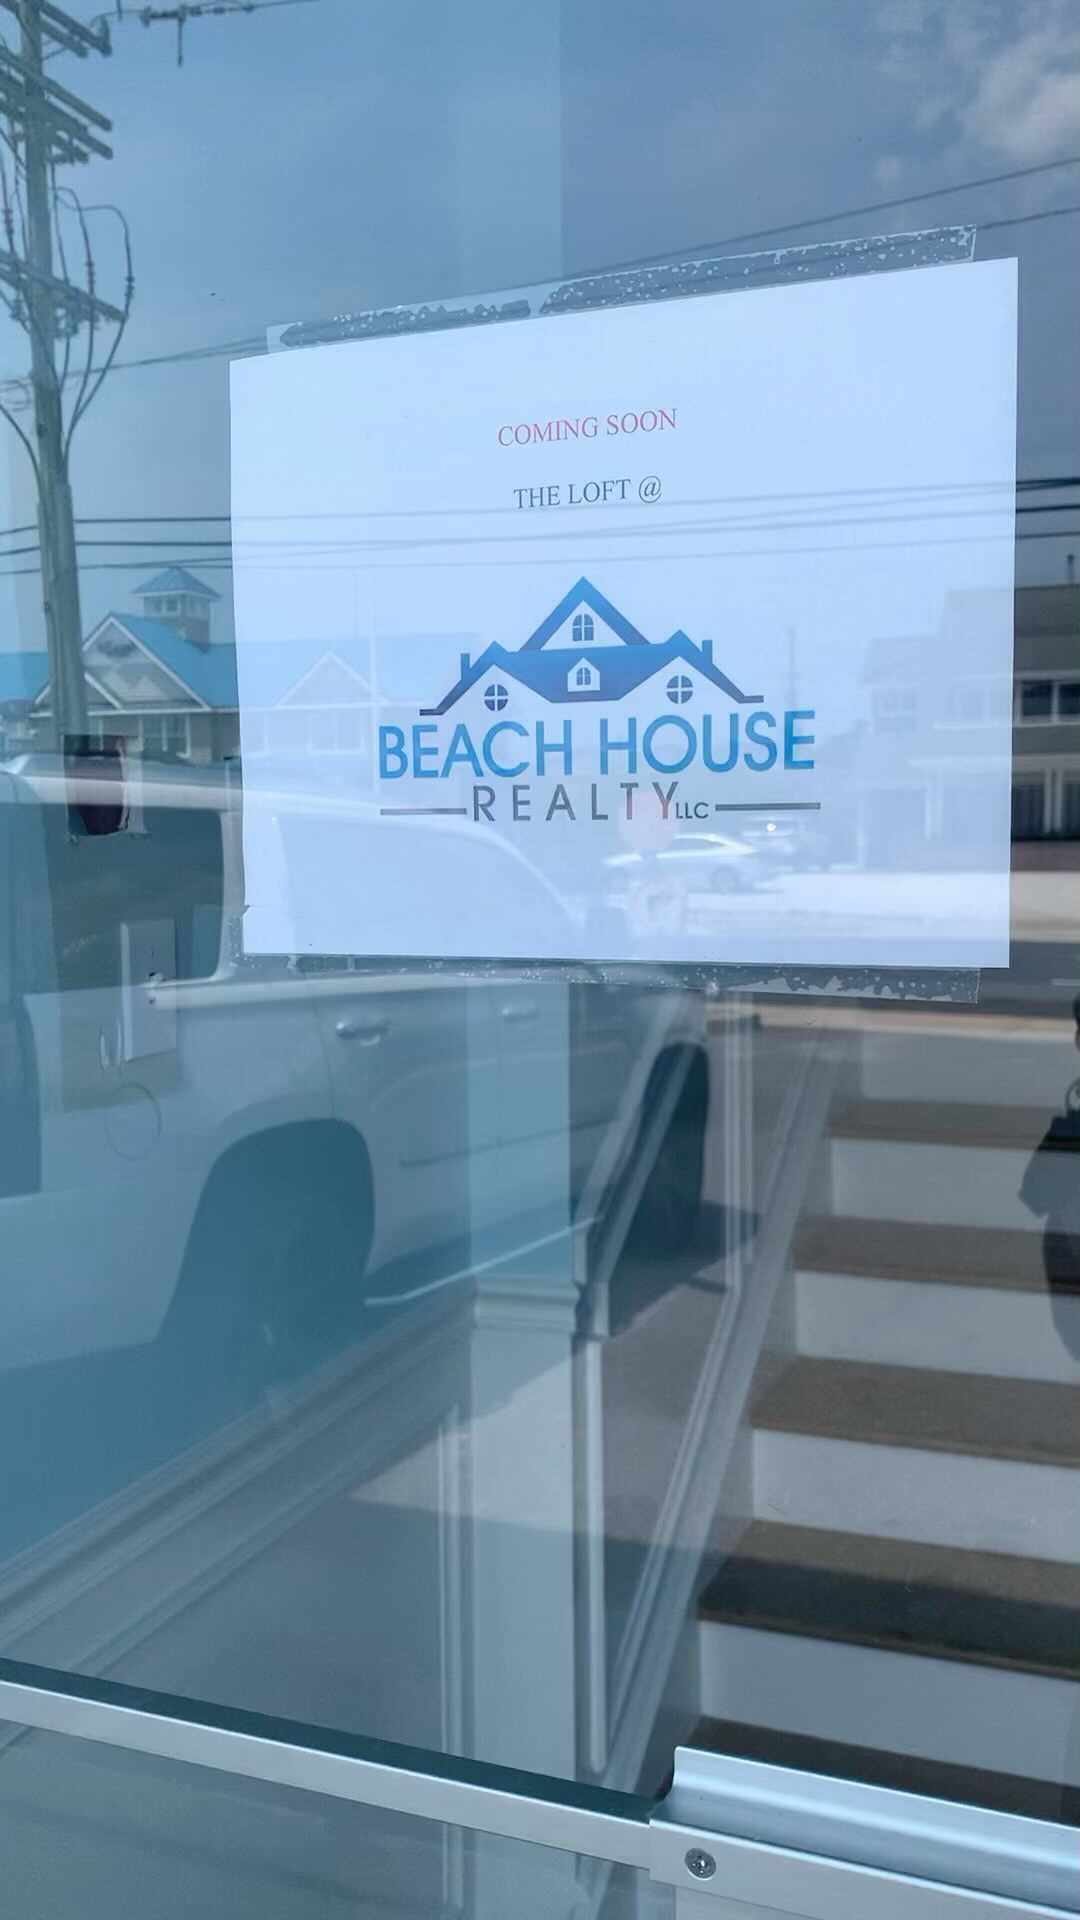 COMING SOON!! The Loft  Beach House Realty!! 

Just another reason why I love wh...